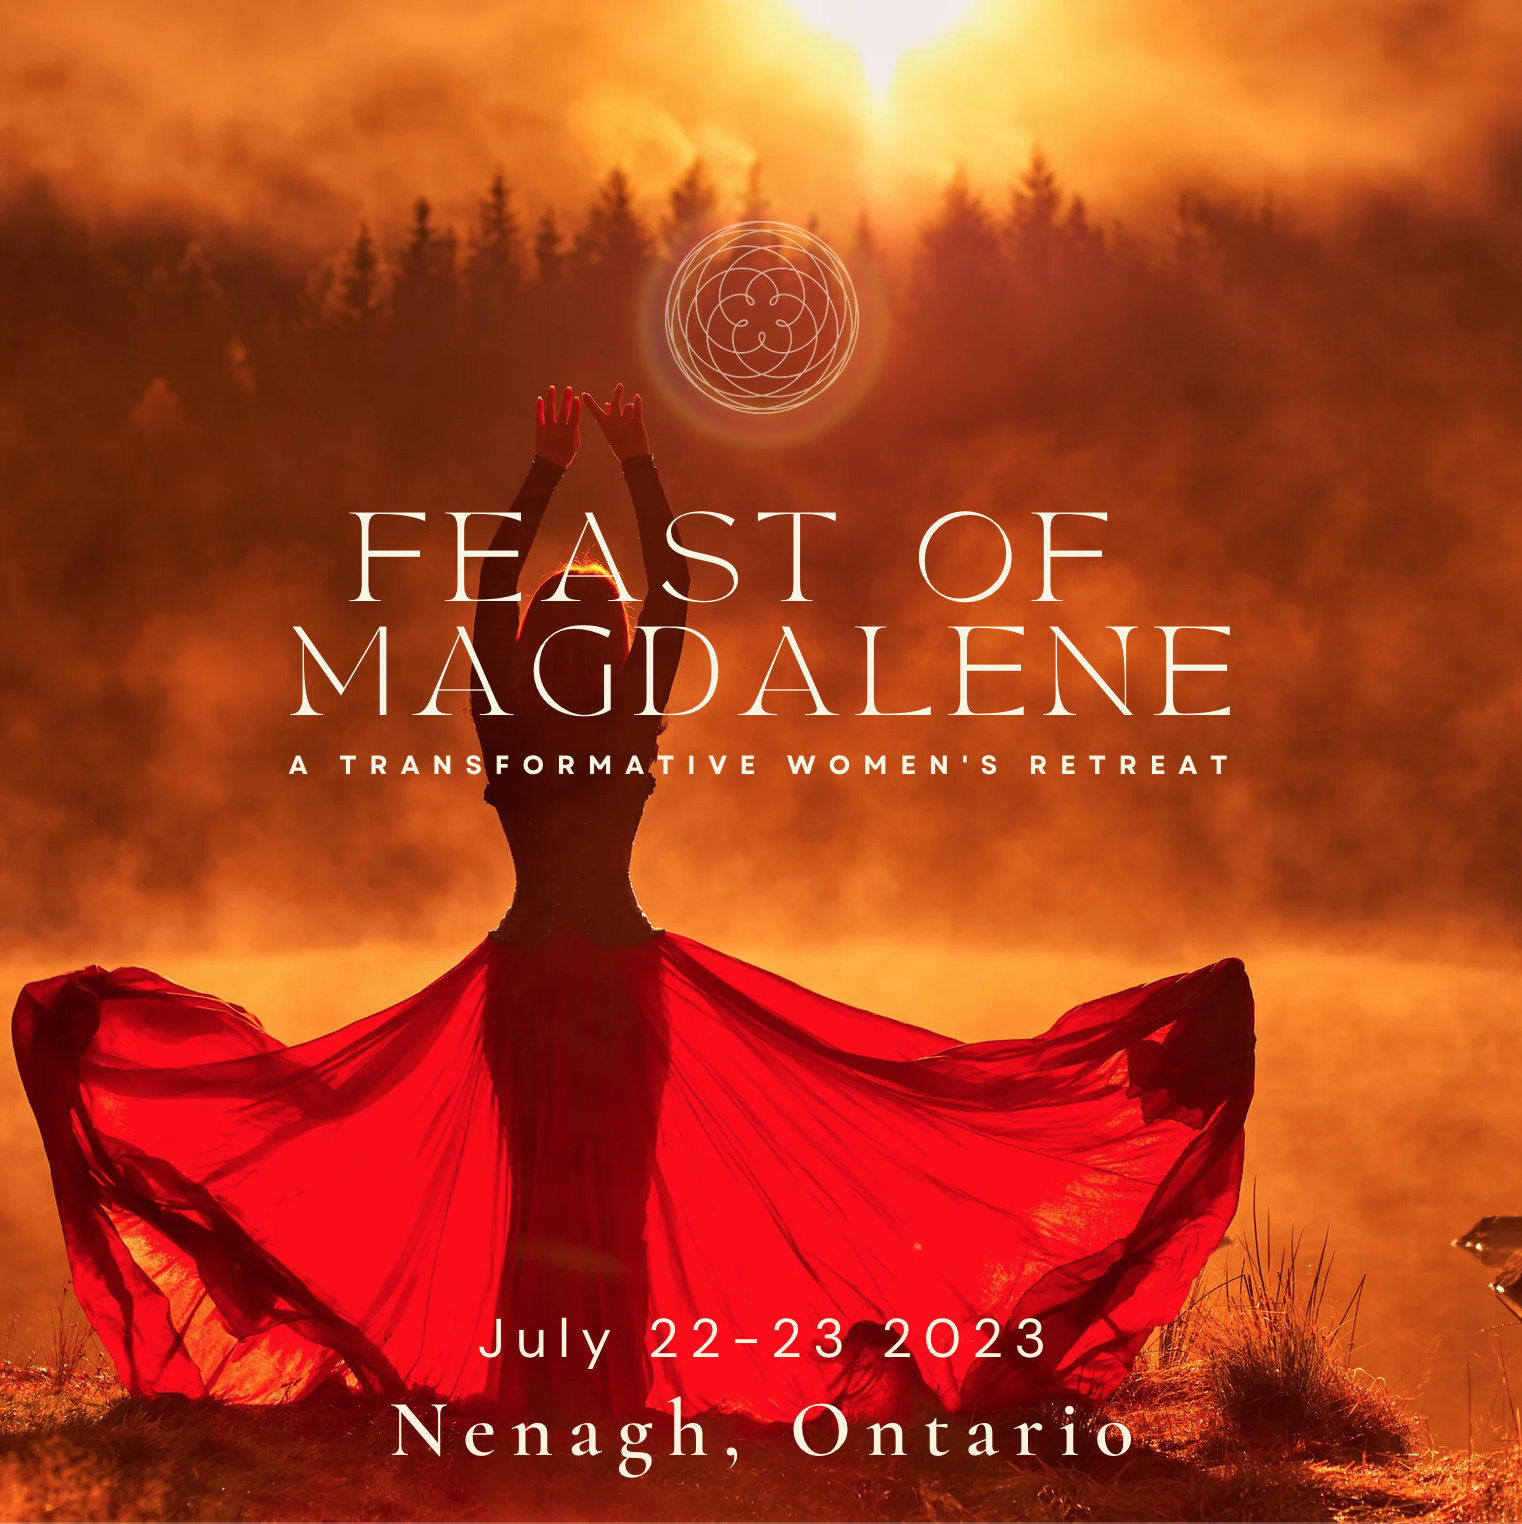 Mary Magdalene feast day event